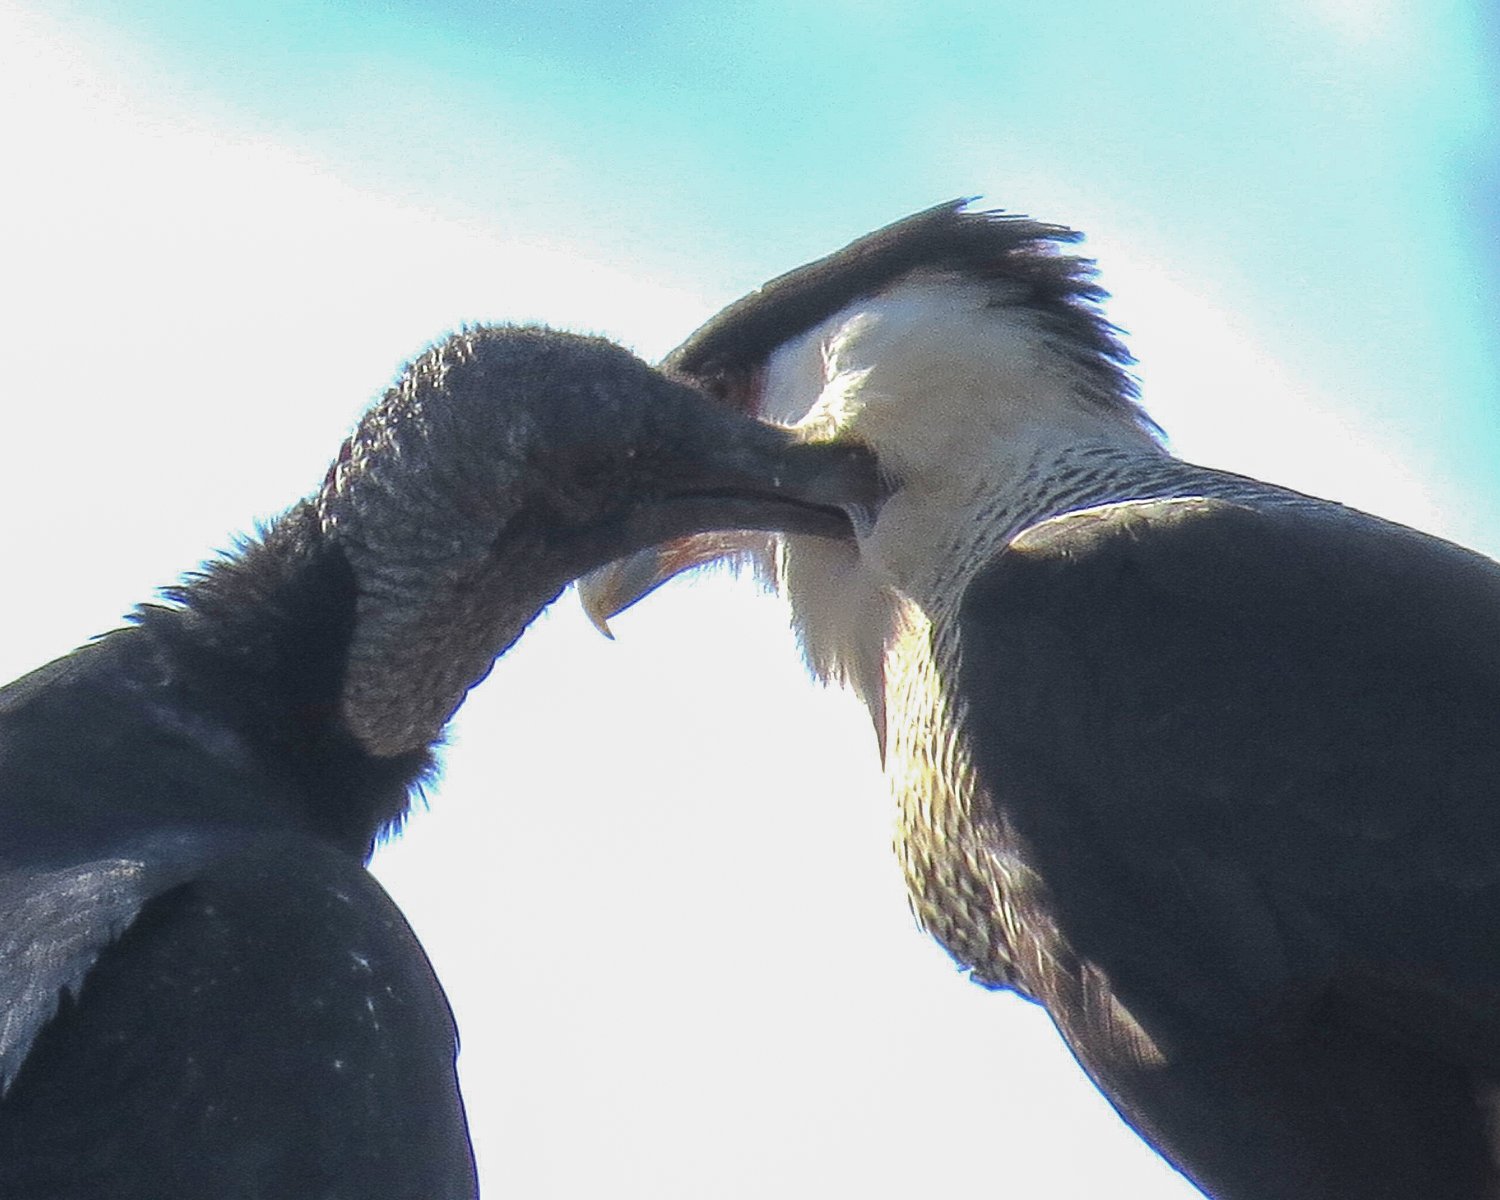  The Black Vulture Preening the neck feathers of the Crested Caracara.  